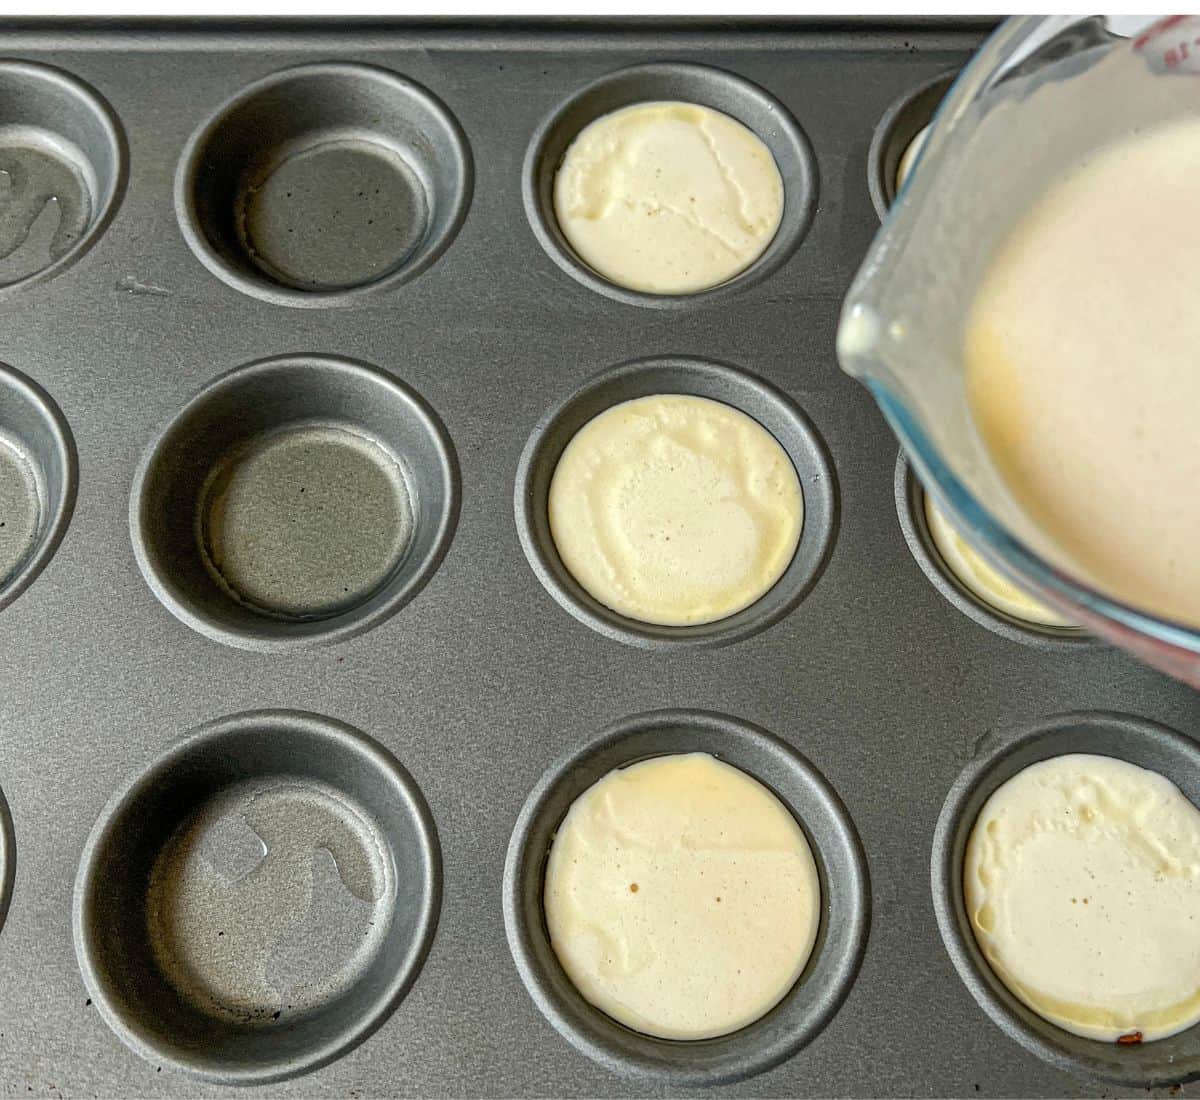 Yorkshire pudding batter being poured into a muffin tray.